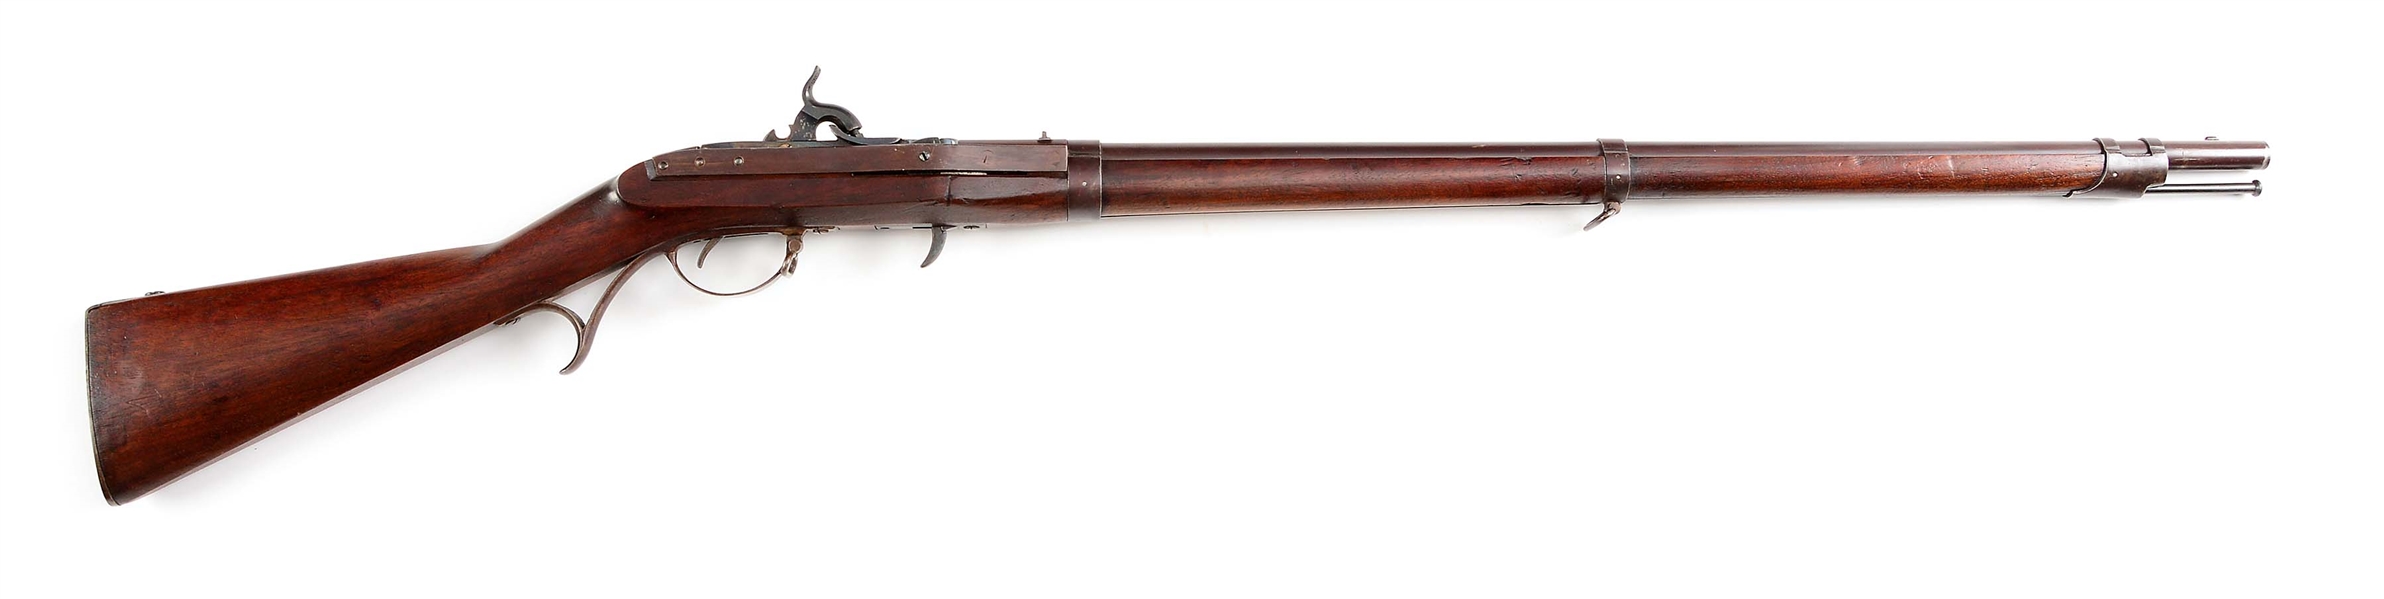 (A) U.S. MODEL 1819 HALL BREECHLOADING PERCUSSION CONVERSION RIFLE BY HARPERS FERRY.